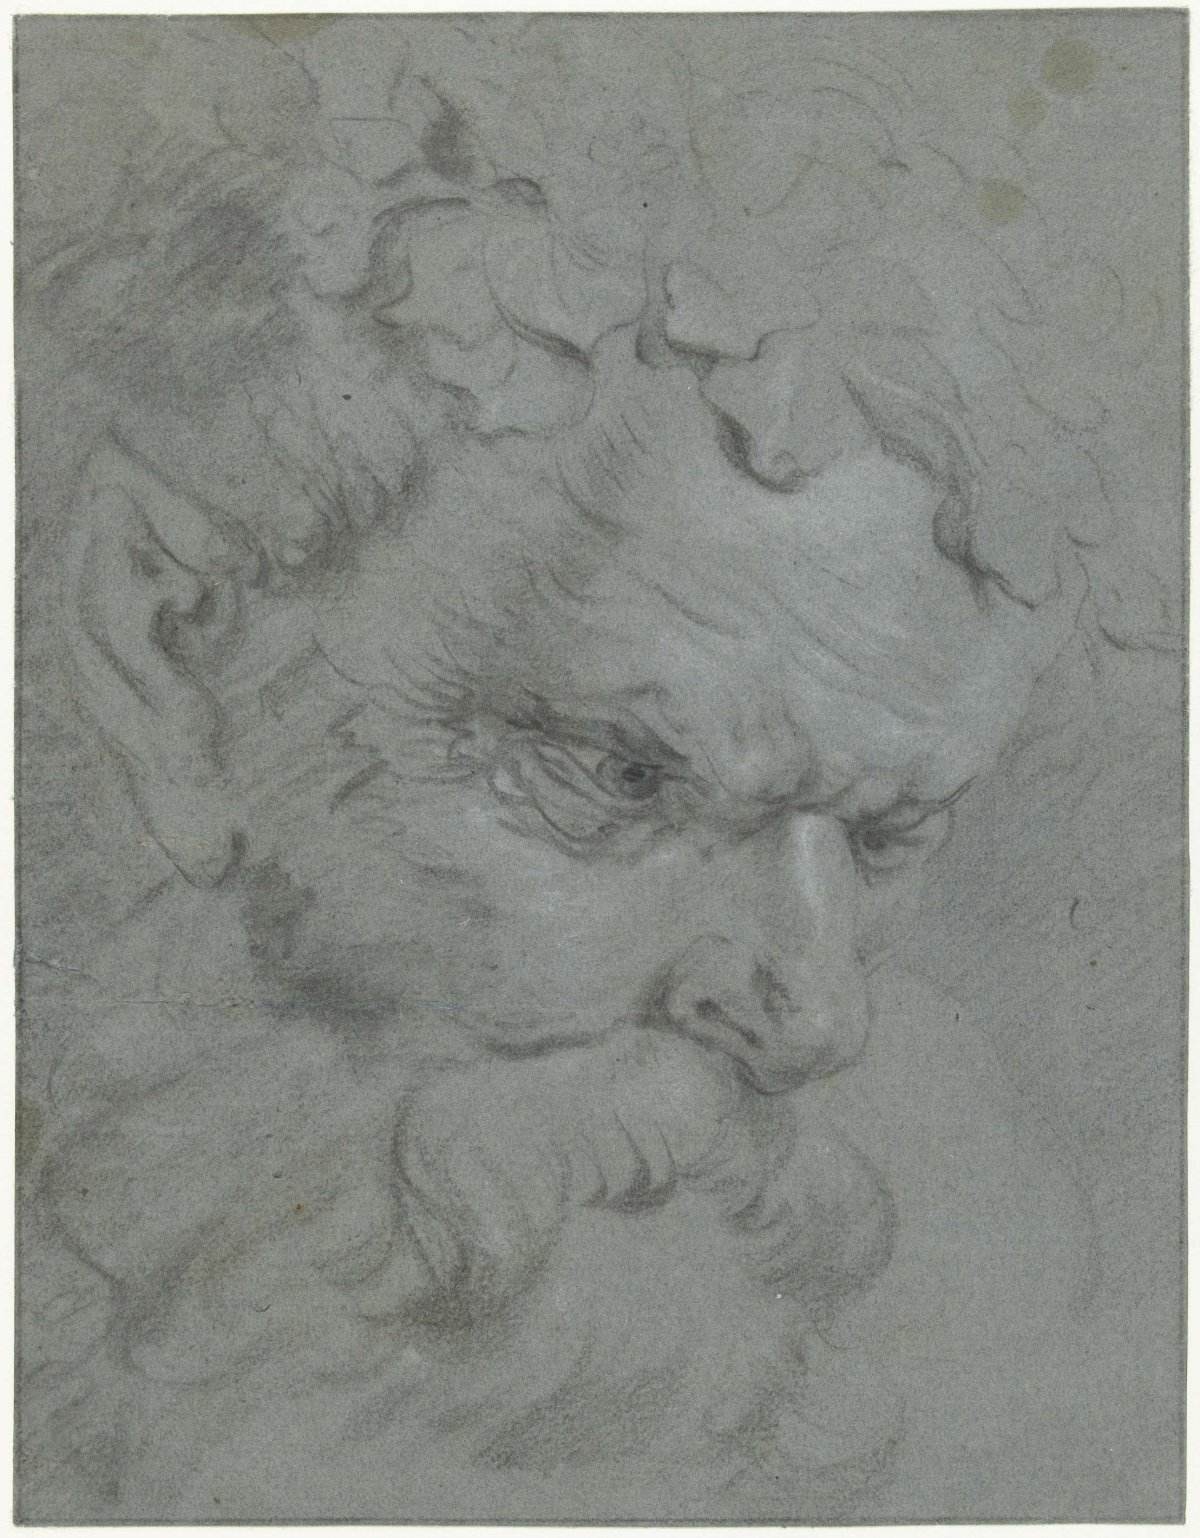 Bacchus head, looking down to the right, Anthony van Dyck, 1610 - 1641